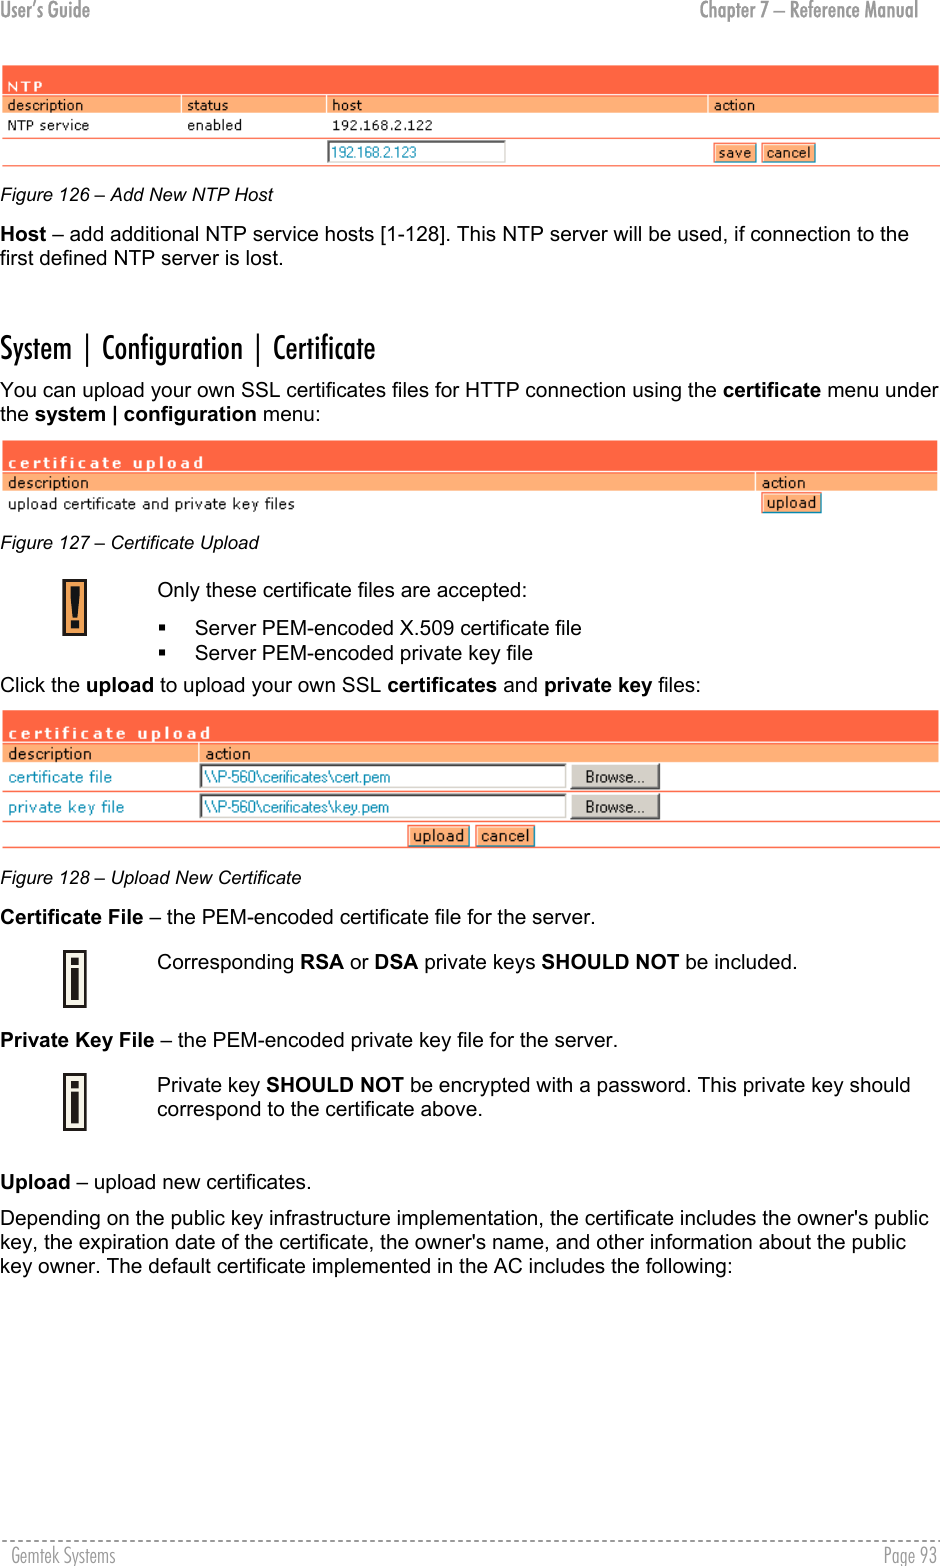 User’s Guide  Chapter 7 – Reference Manual  Figure 126 – Add New NTP Host Host – add additional NTP service hosts [1-128]. This NTP server will be used, if connection to the first defined NTP server is lost.  System | Configuration | Certificate You can upload your own SSL certificates files for HTTP connection using the certificate menu under the system | configuration menu:  Figure 127 – Certificate Upload  Only these certificate files are accepted:   Server PEM-encoded X.509 certificate file    Server PEM-encoded private key file Click the upload to upload your own SSL certificates and private key files:  Figure 128 – Upload New Certificate  Certificate File – the PEM-encoded certificate file for the server.  Corresponding RSA or DSA private keys SHOULD NOT be included.  Private Key File – the PEM-encoded private key file for the server.  Private key SHOULD NOT be encrypted with a password. This private key should correspond to the certificate above.  Upload – upload new certificates. Depending on the public key infrastructure implementation, the certificate includes the owner&apos;s public key, the expiration date of the certificate, the owner&apos;s name, and other information about the public key owner. The default certificate implemented in the AC includes the following: Gemtek Systems    Page 93  